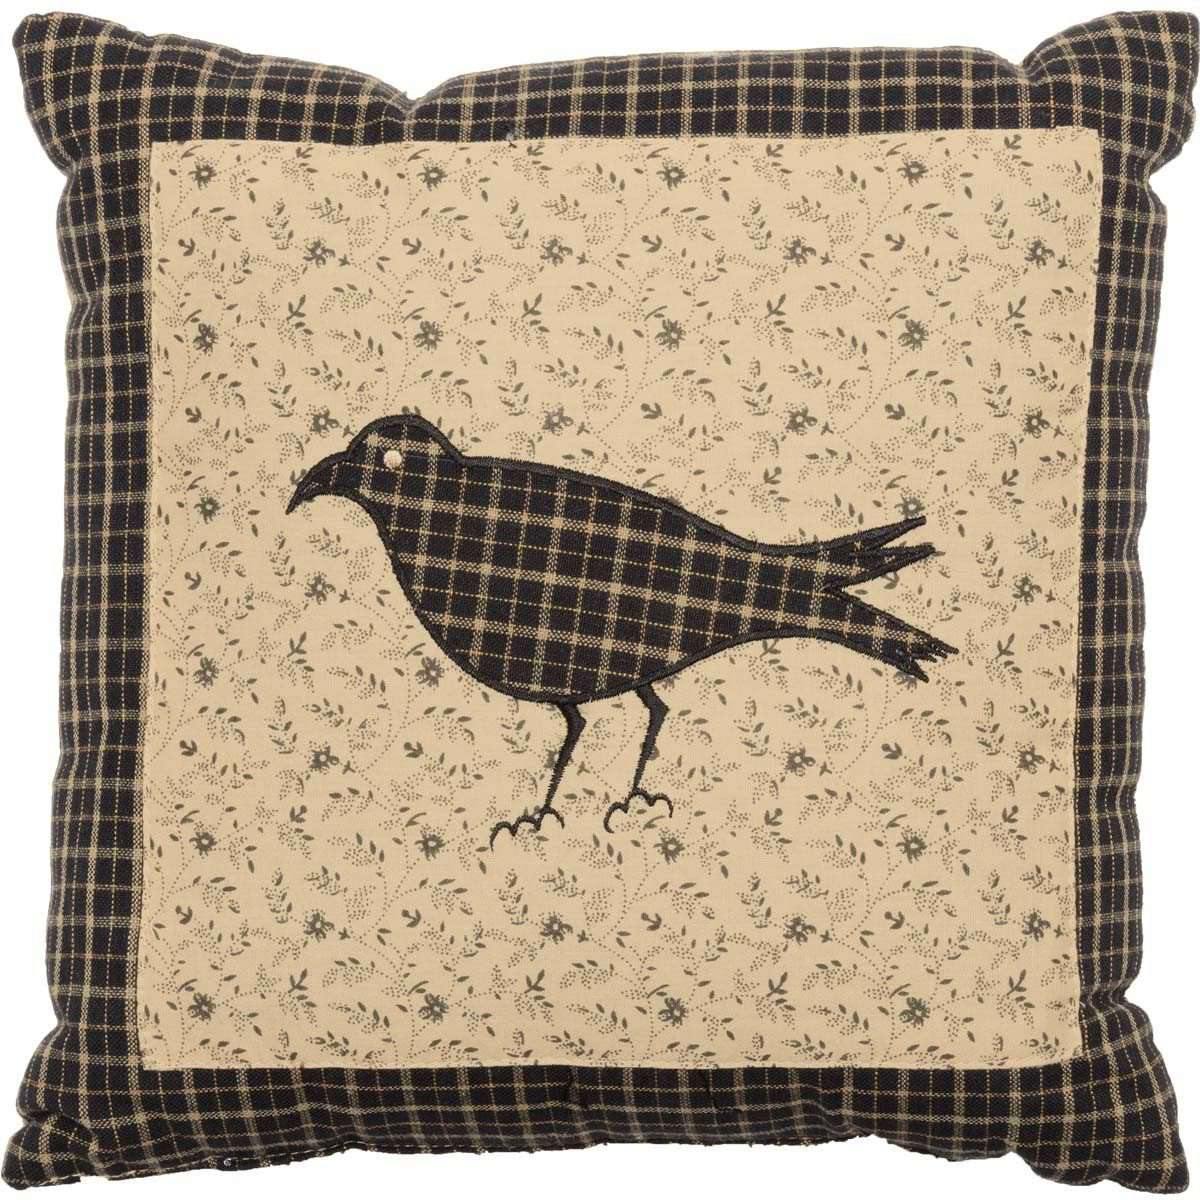 Kettle Grove Pillow Crow 10x10 VHC Brands front